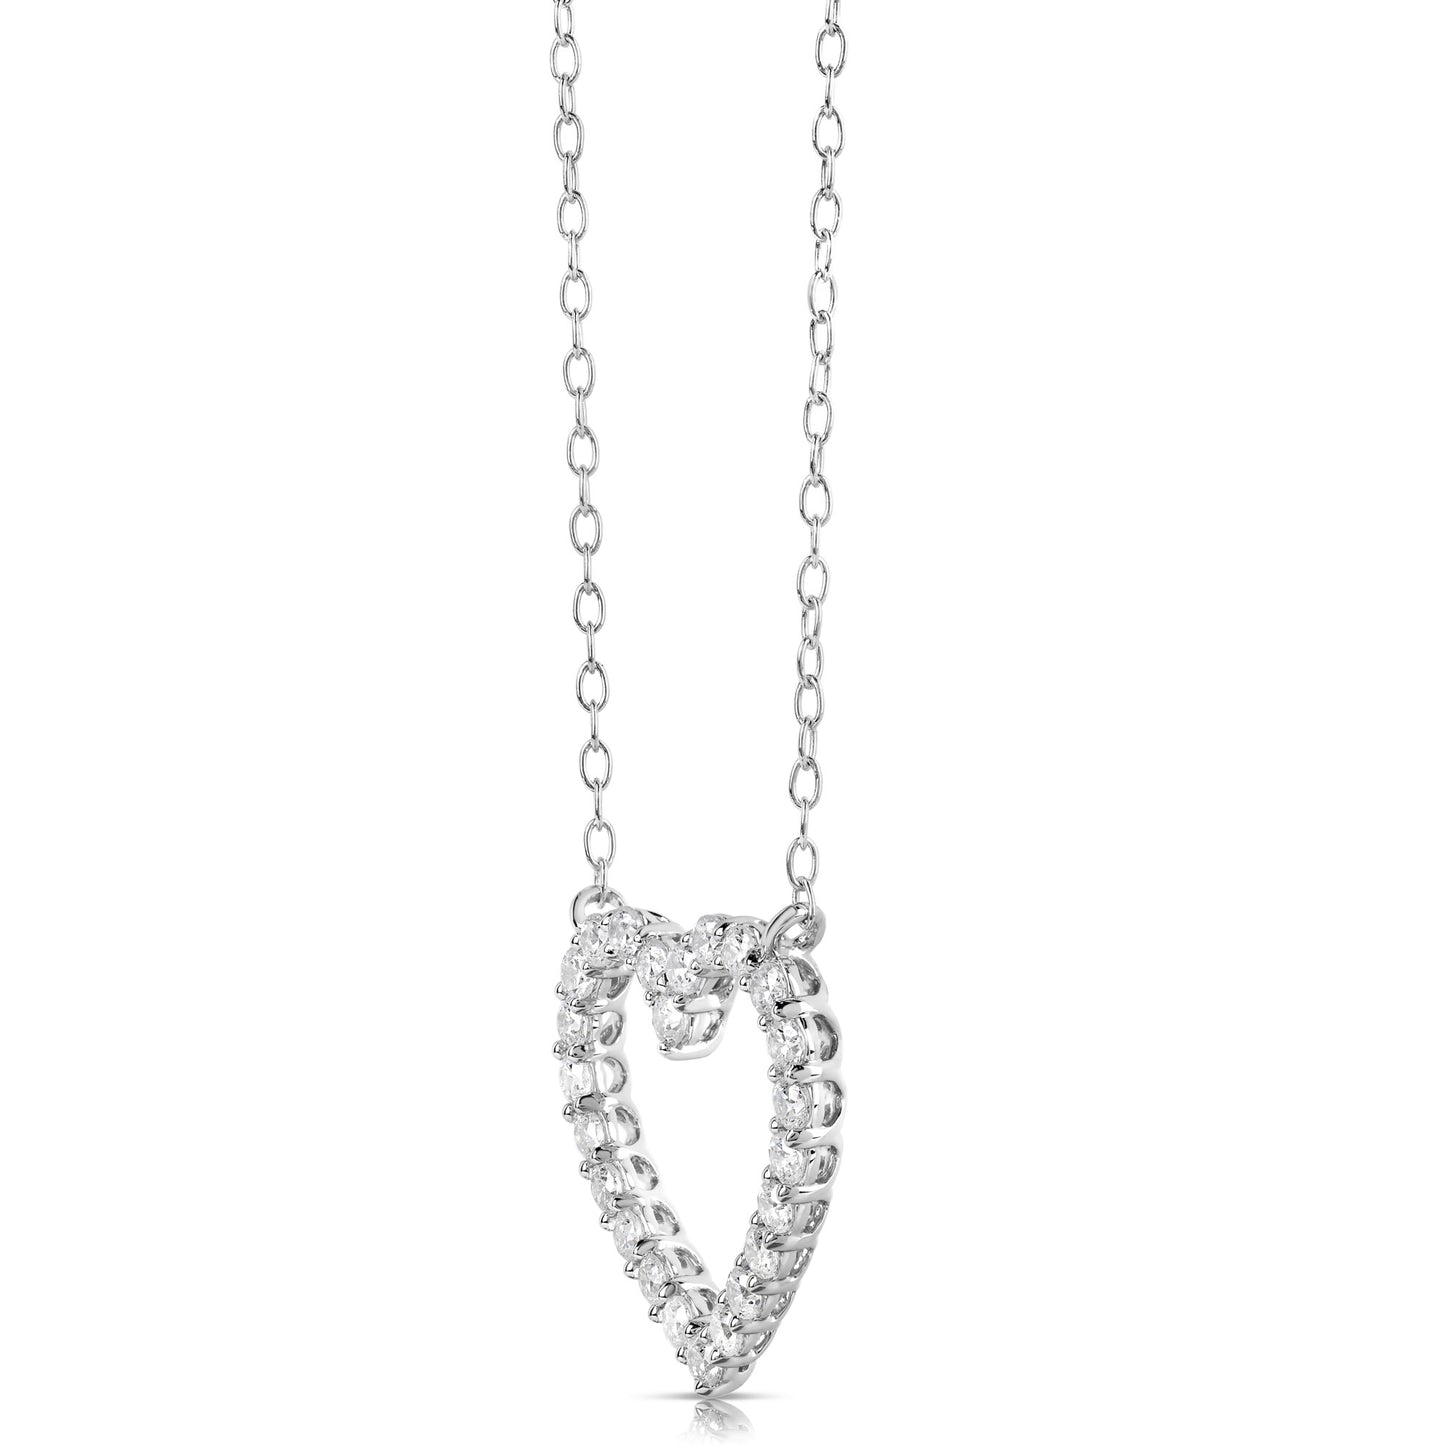 1/4 CT COLORLESS FLAWLESS HEART SHAPED PENDANT